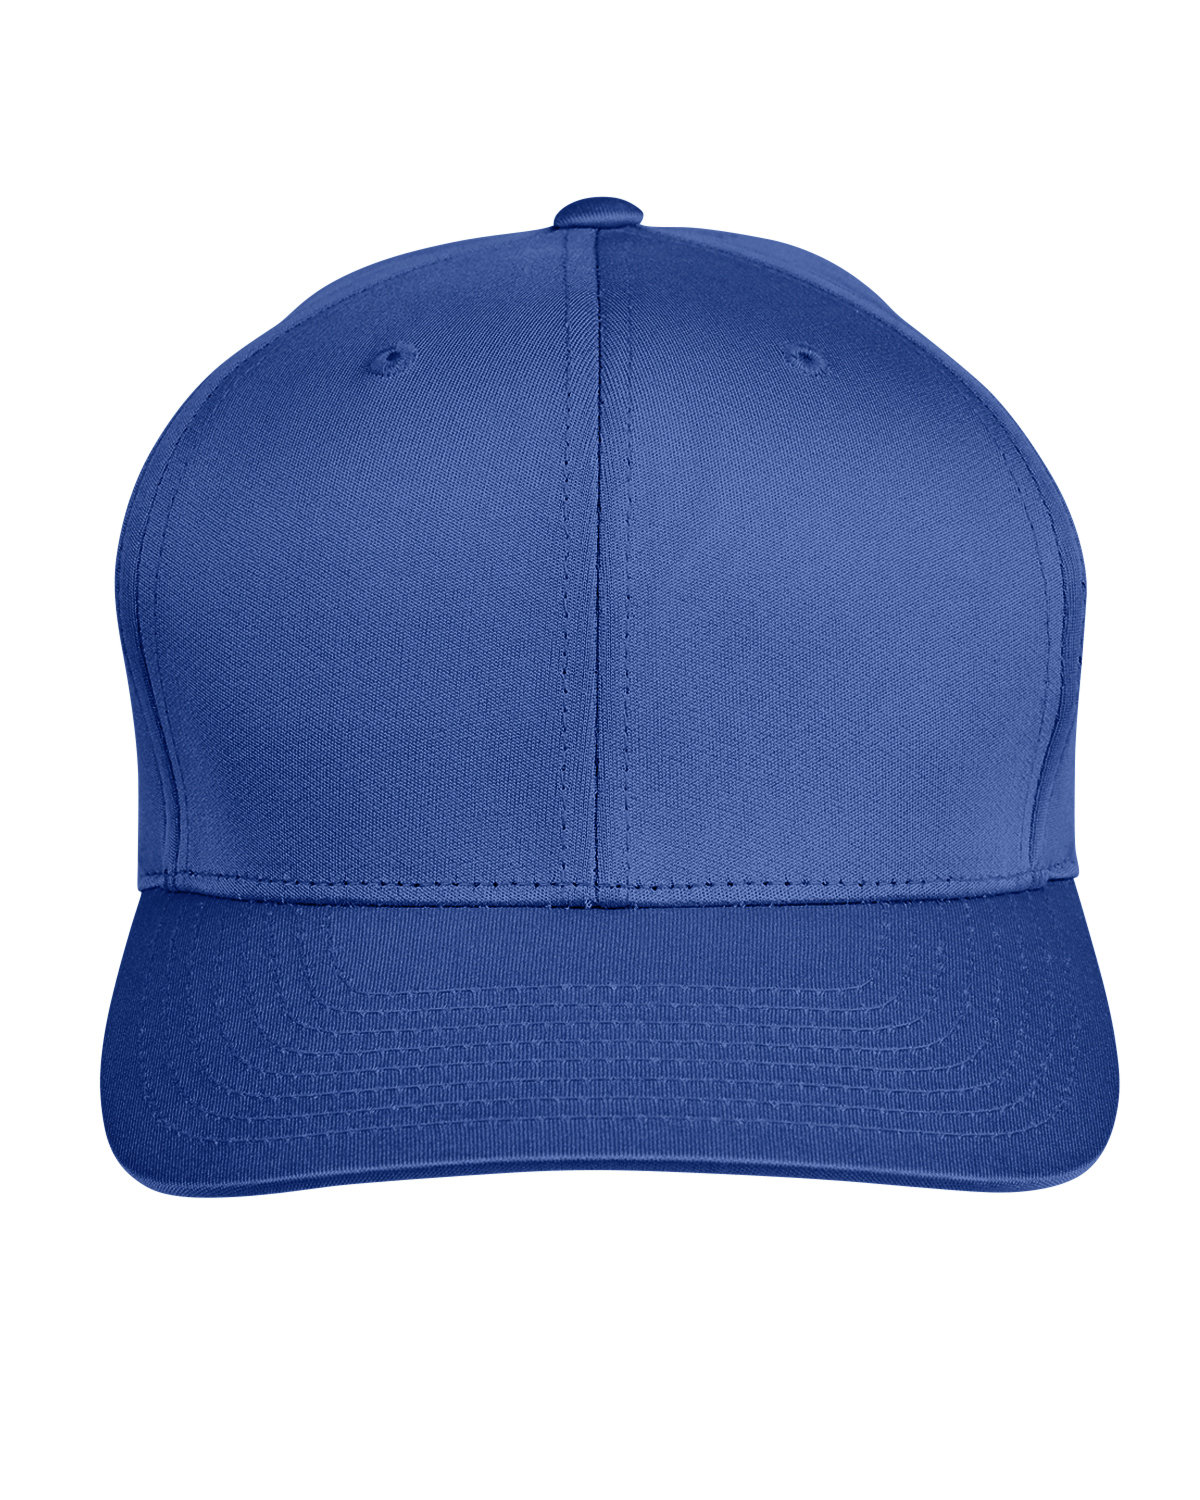 Team 365 by Yupoong® Adult Zone Performance Cap SPORT ROYAL 